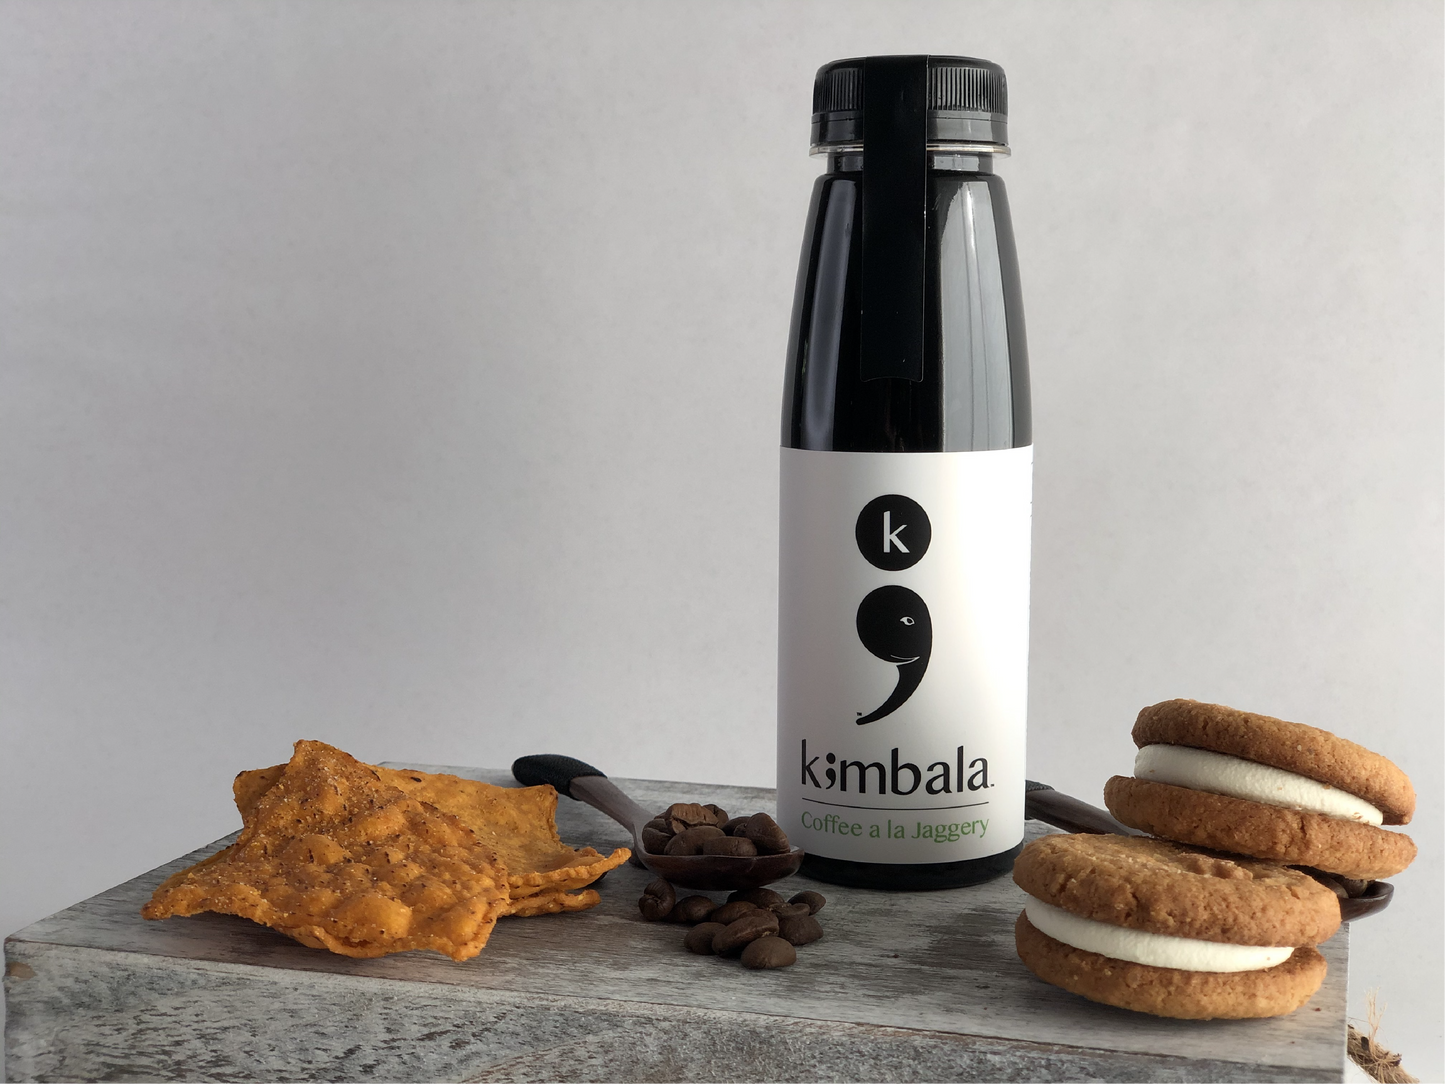 Kimbala Coffee a la jaggery, 10.2oz bottle of clean caffeine black coffee lightly sweetened, surrounded by coffee beans on a small wooden spoon, cream filled cookies and sweet potato chips. Jaggery is an unrefined sugar made from solidified sugar cane juice.